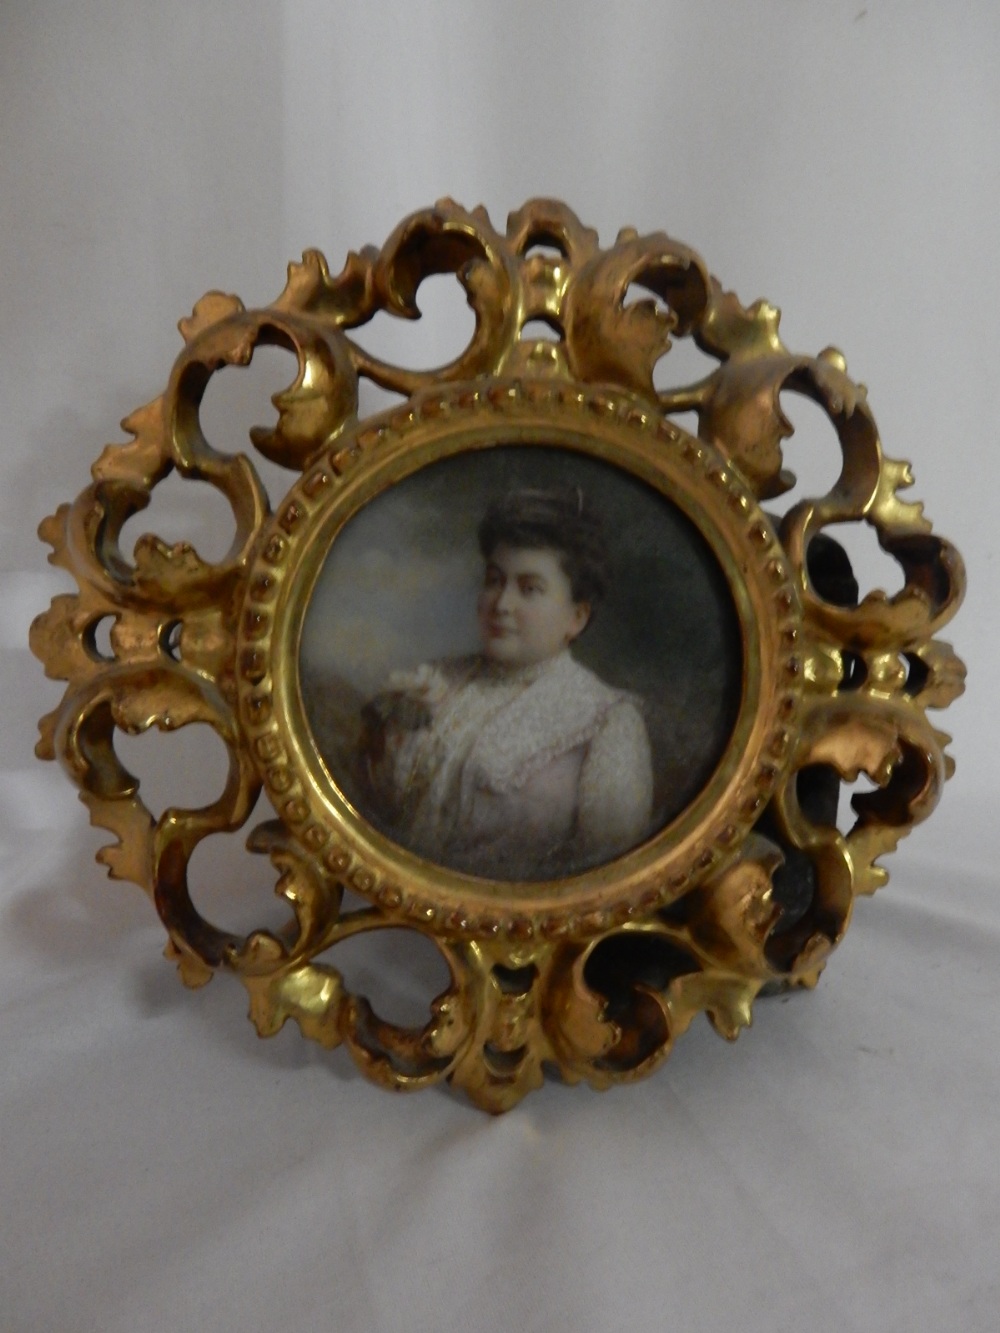 A portrait of an Edwardian lady in pink and lace dress, in a circular Florentine frame and